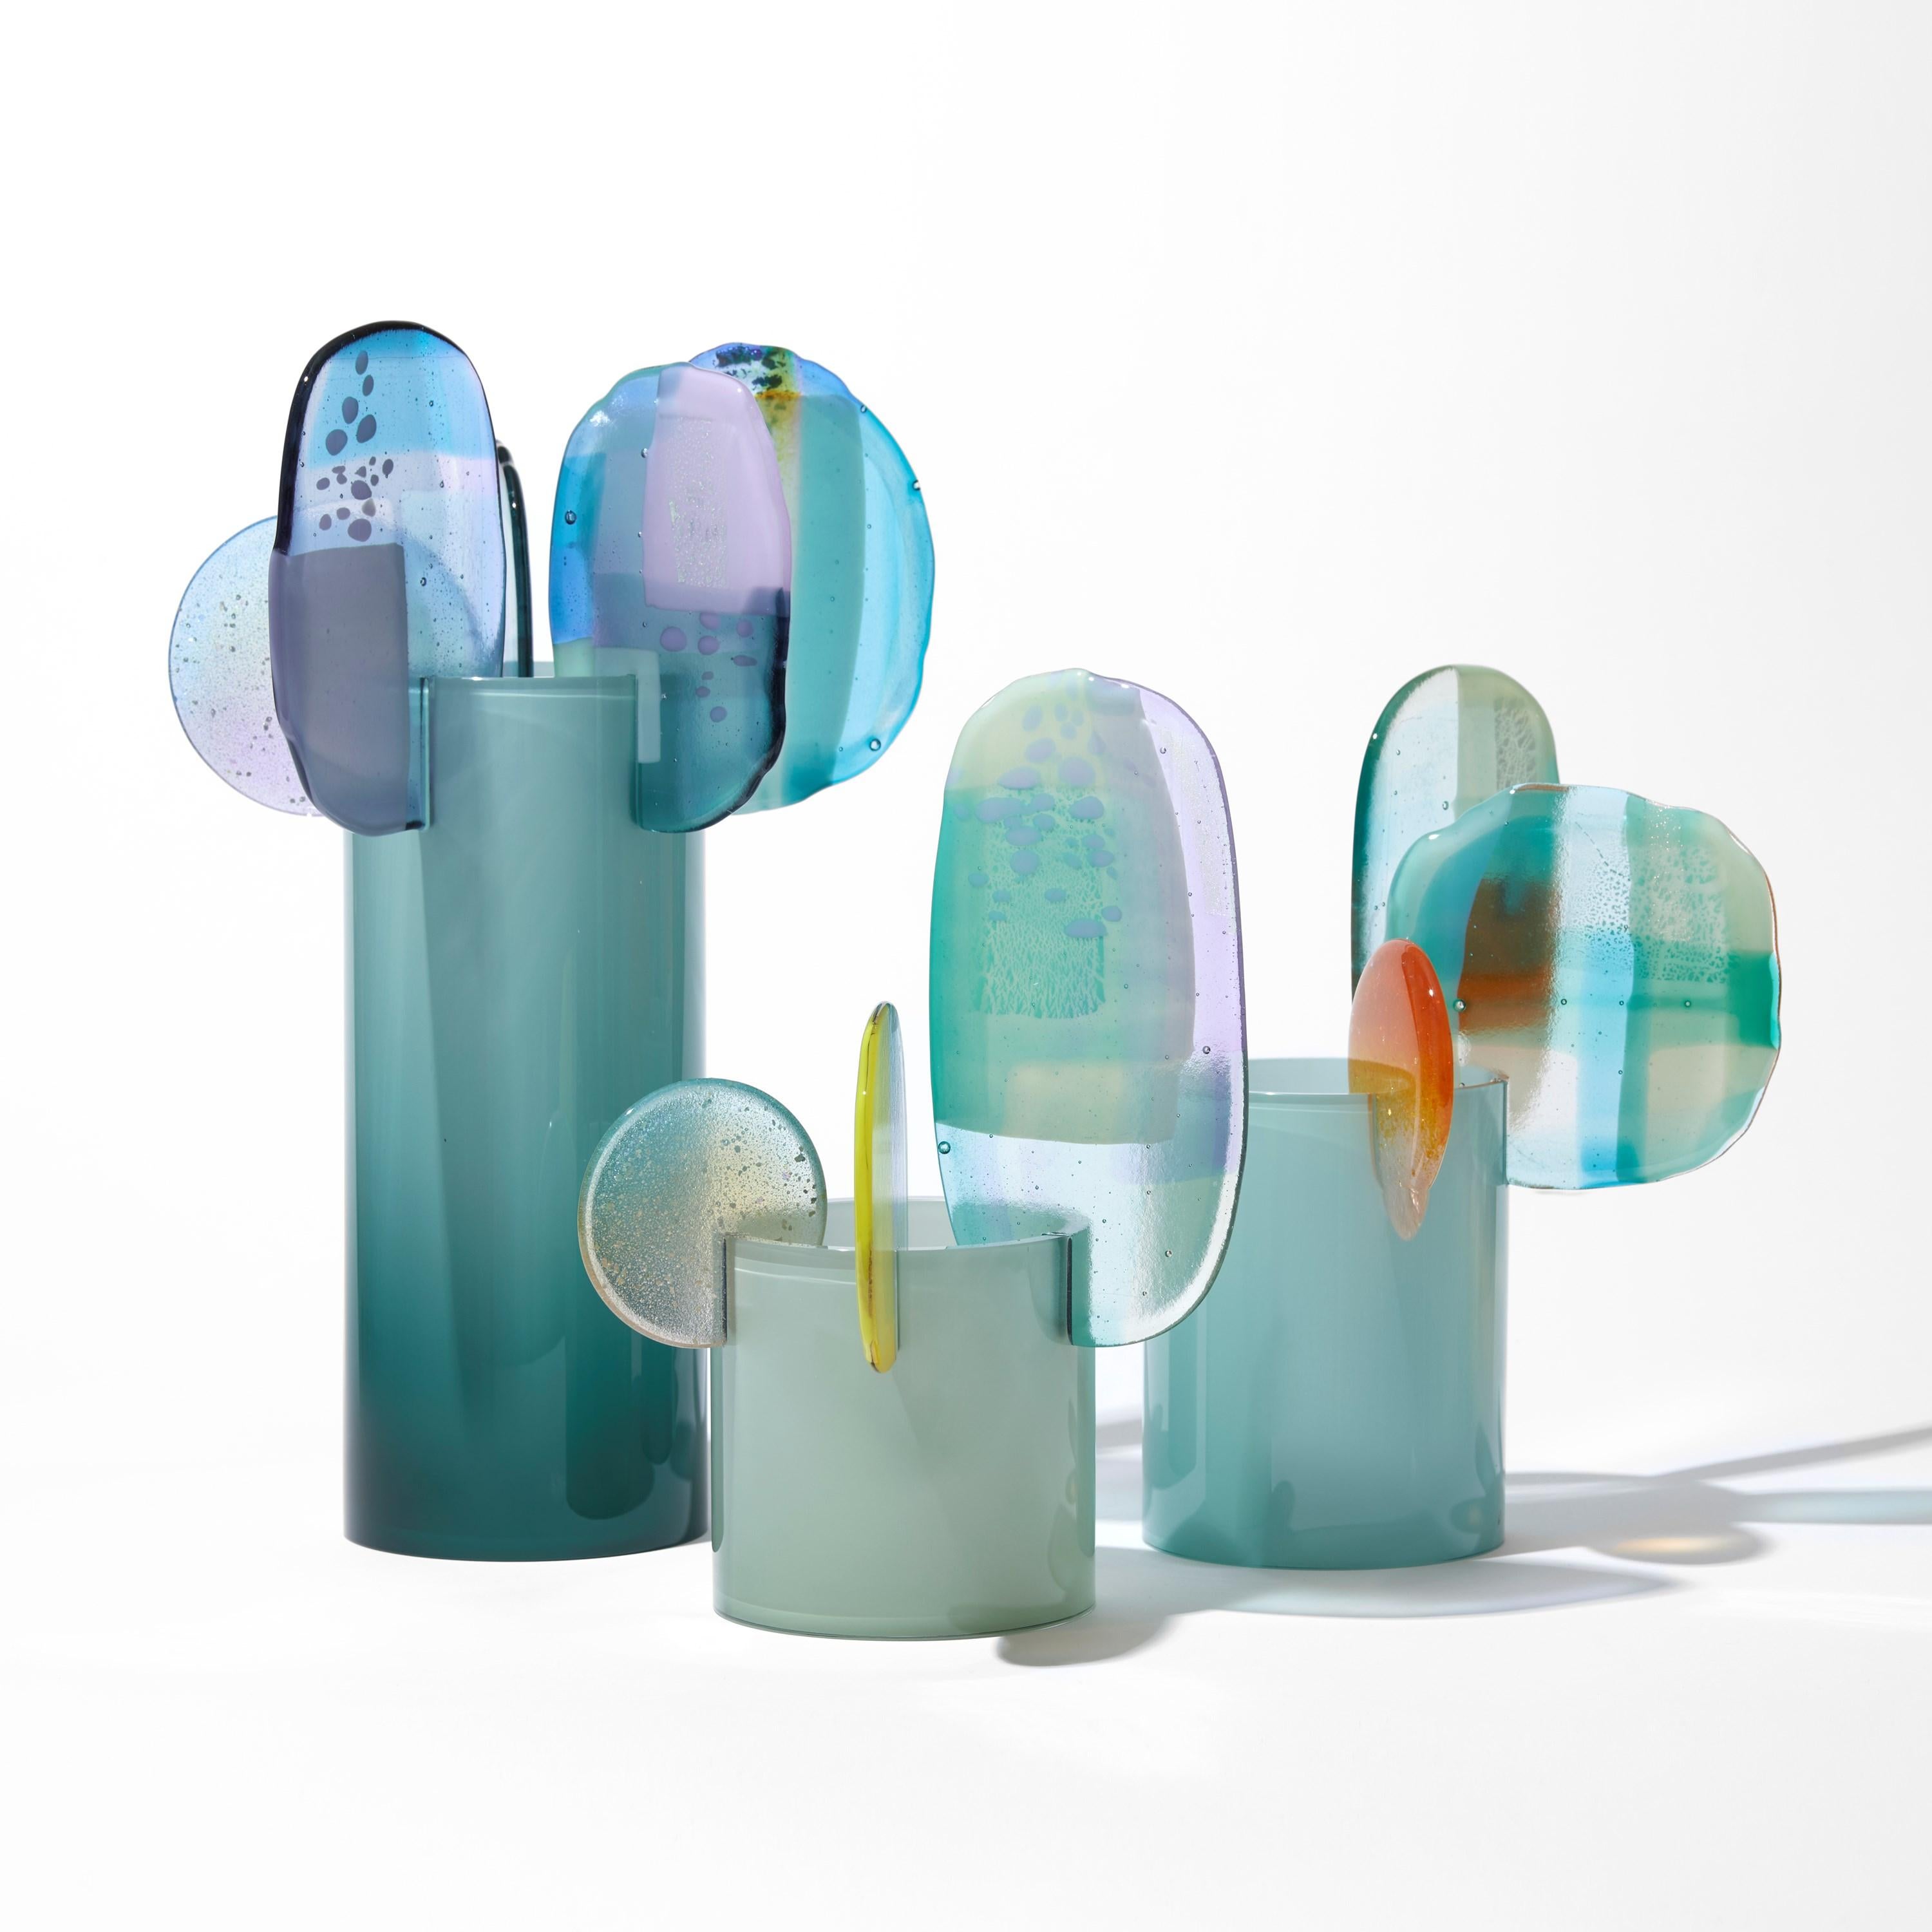 Glass Paradise 08 in Jadeite, jade, aqua, blue & lilac glass sculpture by Amy Cushing For Sale